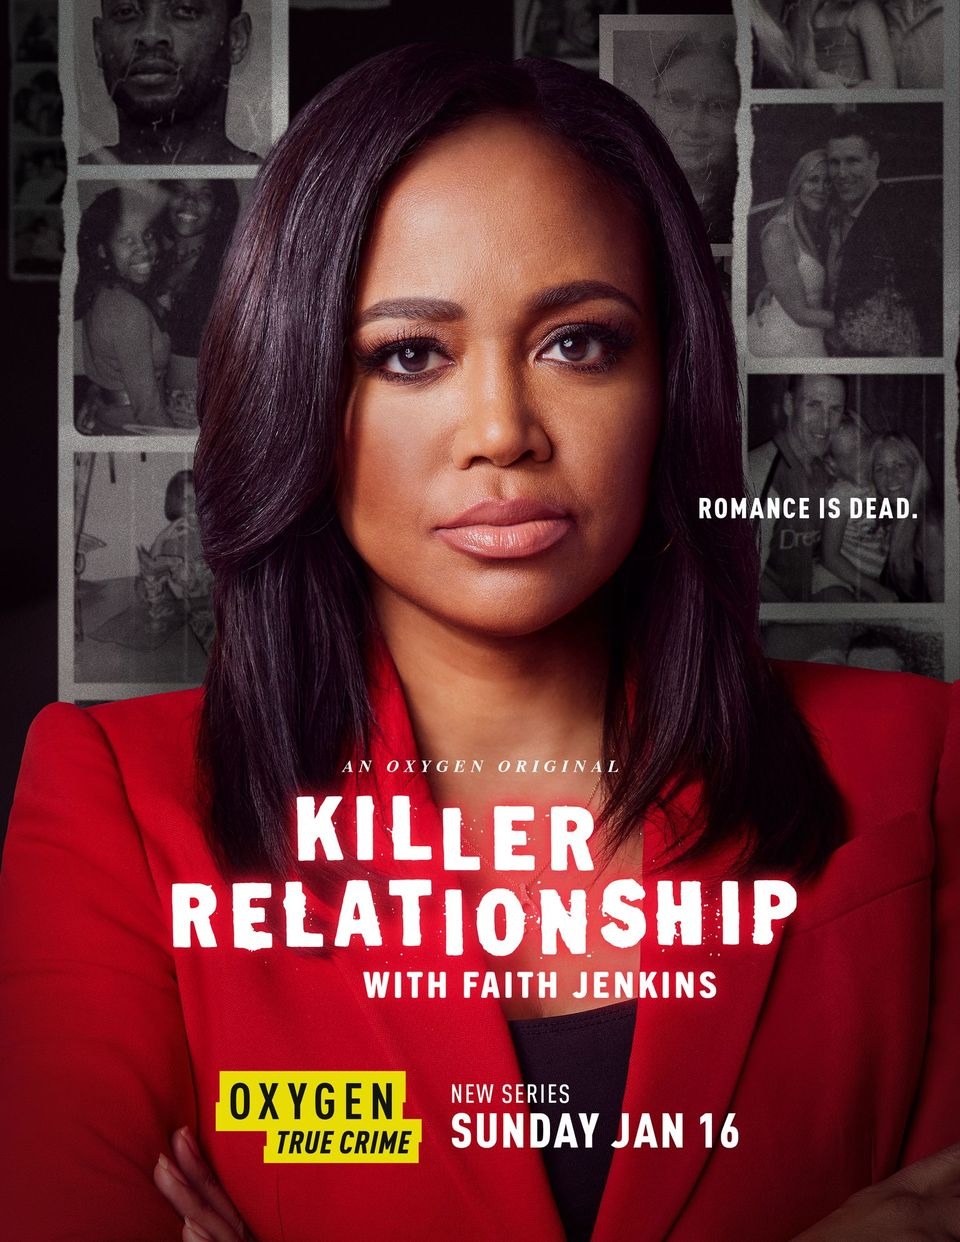 Extra Large Movie Poster Image for Killer Relationship with Faith Jenkins 